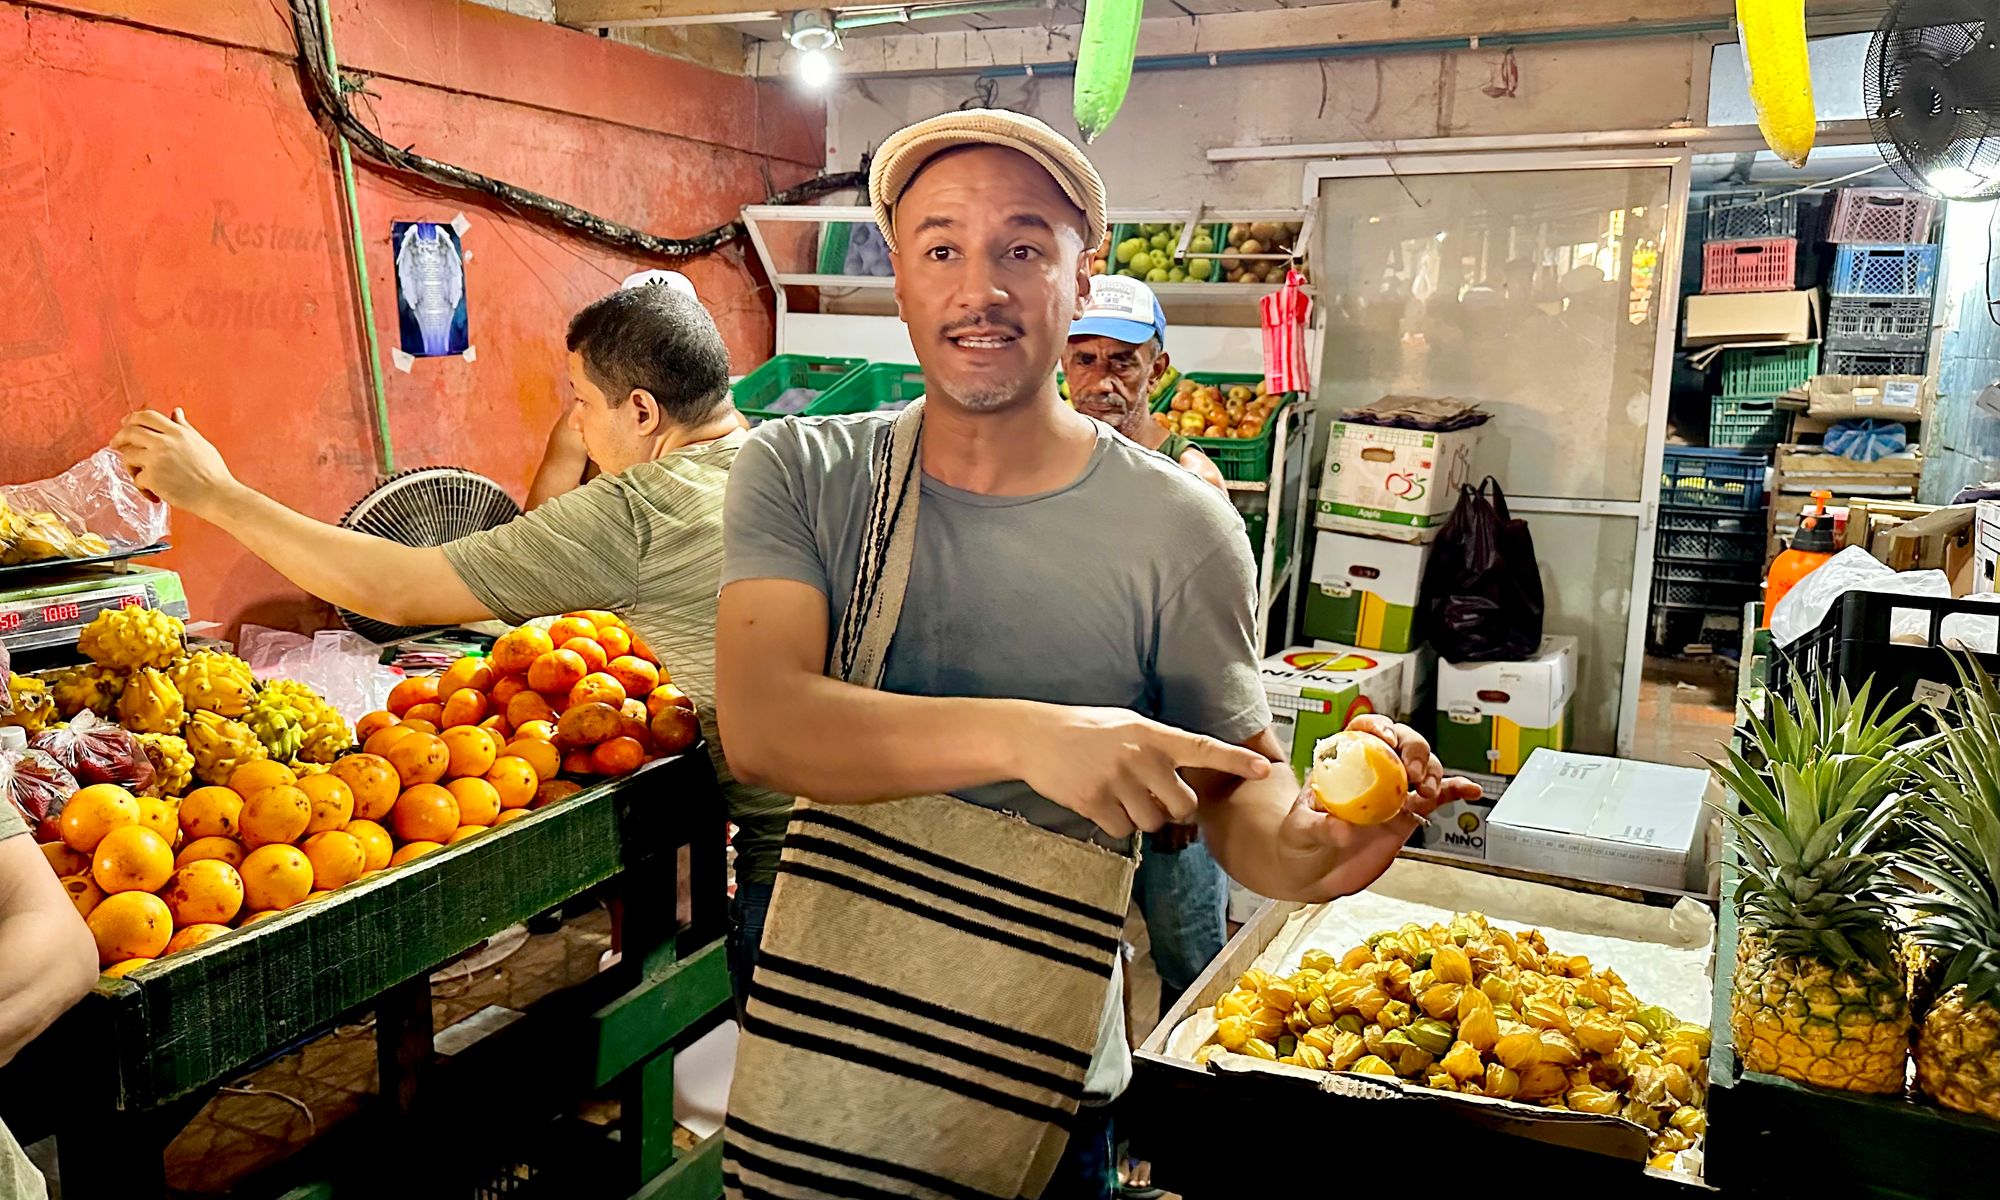 Chef Andres shows us the Granadilla fruit at a market stall.